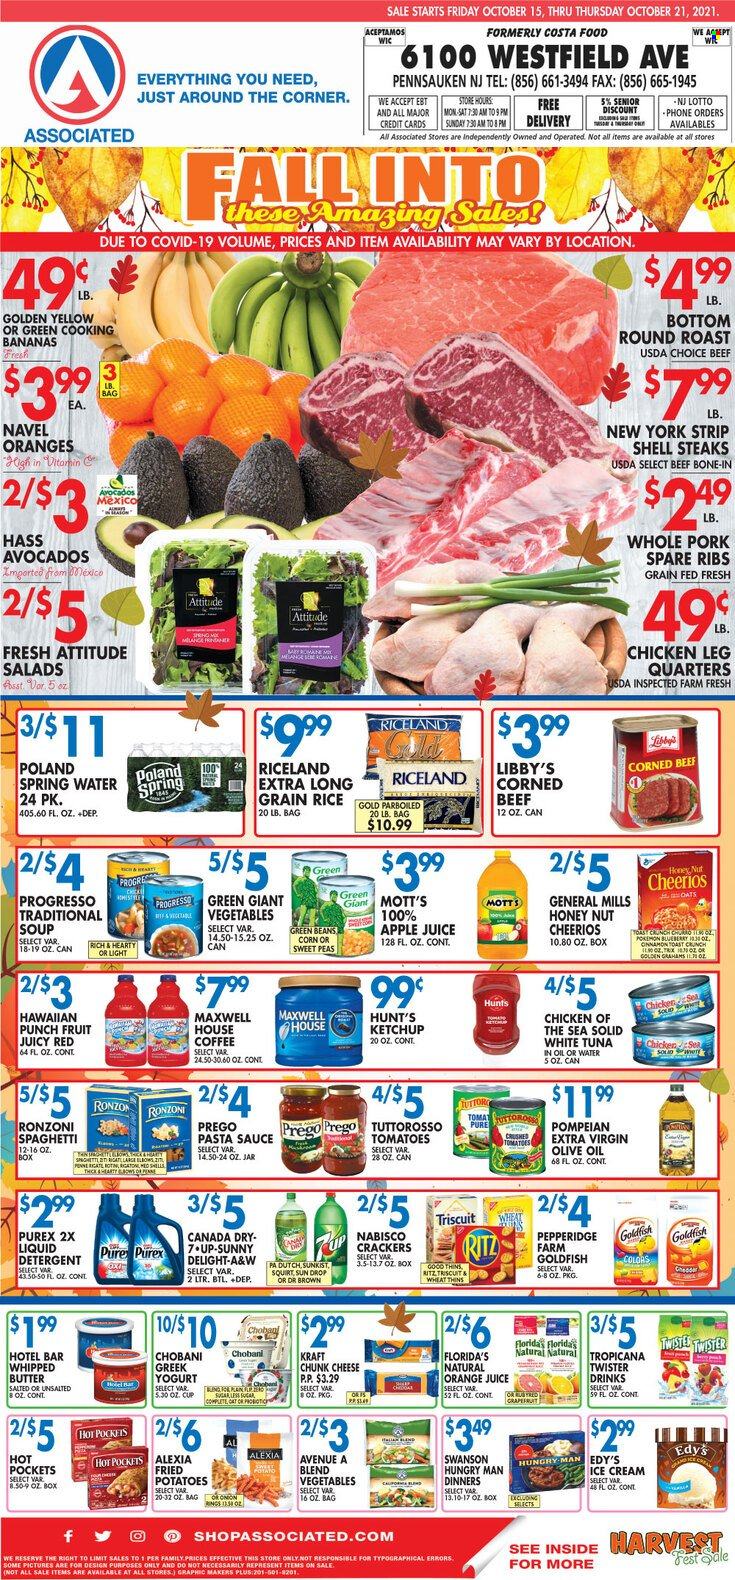 thumbnail - Associated Supermarkets Flyer - 10/15/2021 - 10/21/2021 - Sales products - corn, green beans, tomatoes, potatoes, peas, avocado, Mott's, tuna, spaghetti, hot pocket, pasta sauce, soup, sauce, Progresso, Kraft®, corned beef, cheese, chunk cheese, greek yoghurt, yoghurt, Chobani, whipped butter, ice cream, crackers, Florida's Natural, Thins, Goldfish, Chicken of the Sea, Cheerios, rice, parboiled rice, long grain rice, extra virgin olive oil, olive oil, apple juice, Canada Dry, orange juice, juice, 7UP, A&W, Tropicana Twister, spring water, Maxwell House, coffee, chicken legs, beef meat, steak, round roast, sirloin steak, pork meat, pork ribs, pork spare ribs, detergent, liquid detergent, Purex, deodorant, beef bone, vitamin c, navel oranges. Page 1.